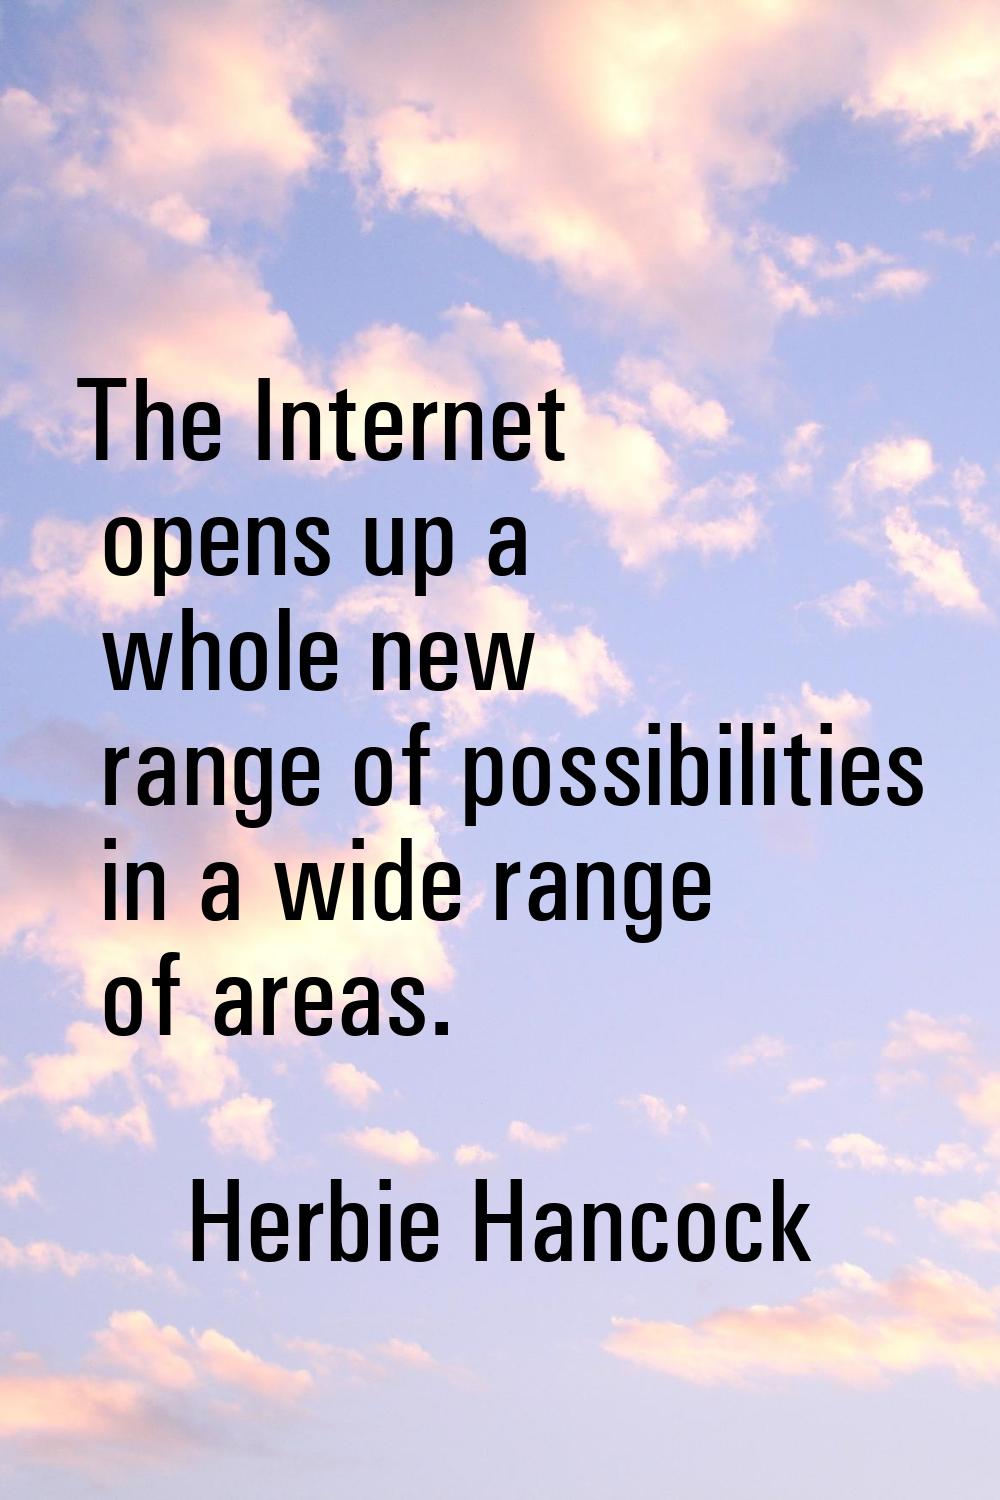 The Internet opens up a whole new range of possibilities in a wide range of areas.